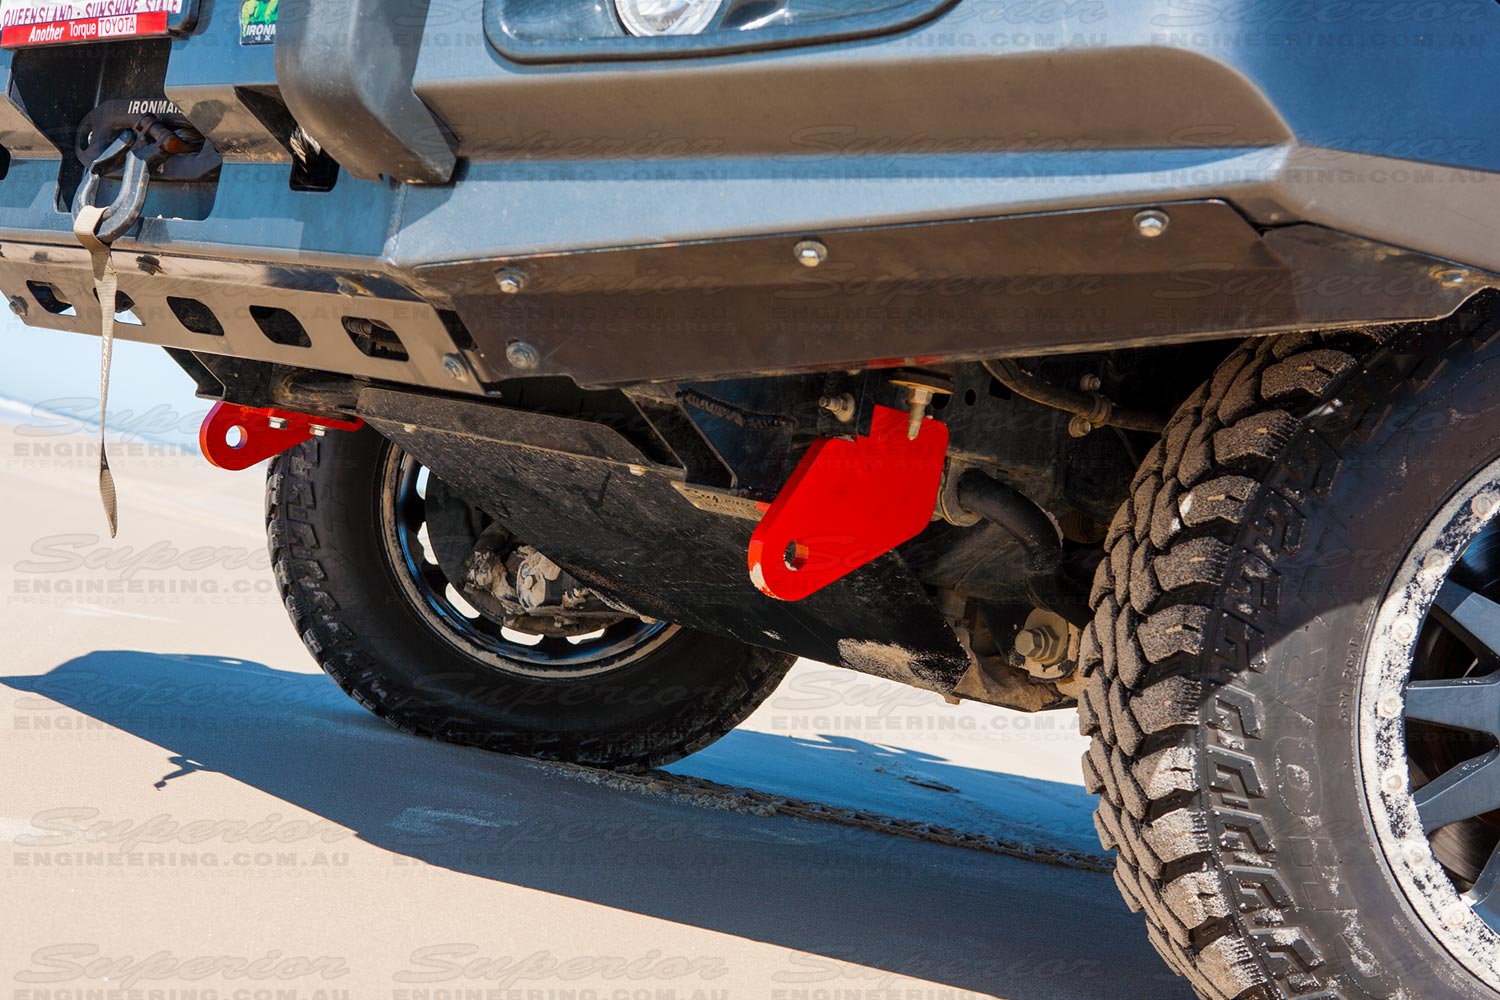 Closeup view of a pair of 200 Series Landcruiser recovery points fitted in the optimal location to handle the stresses experienced during vehicle recovery